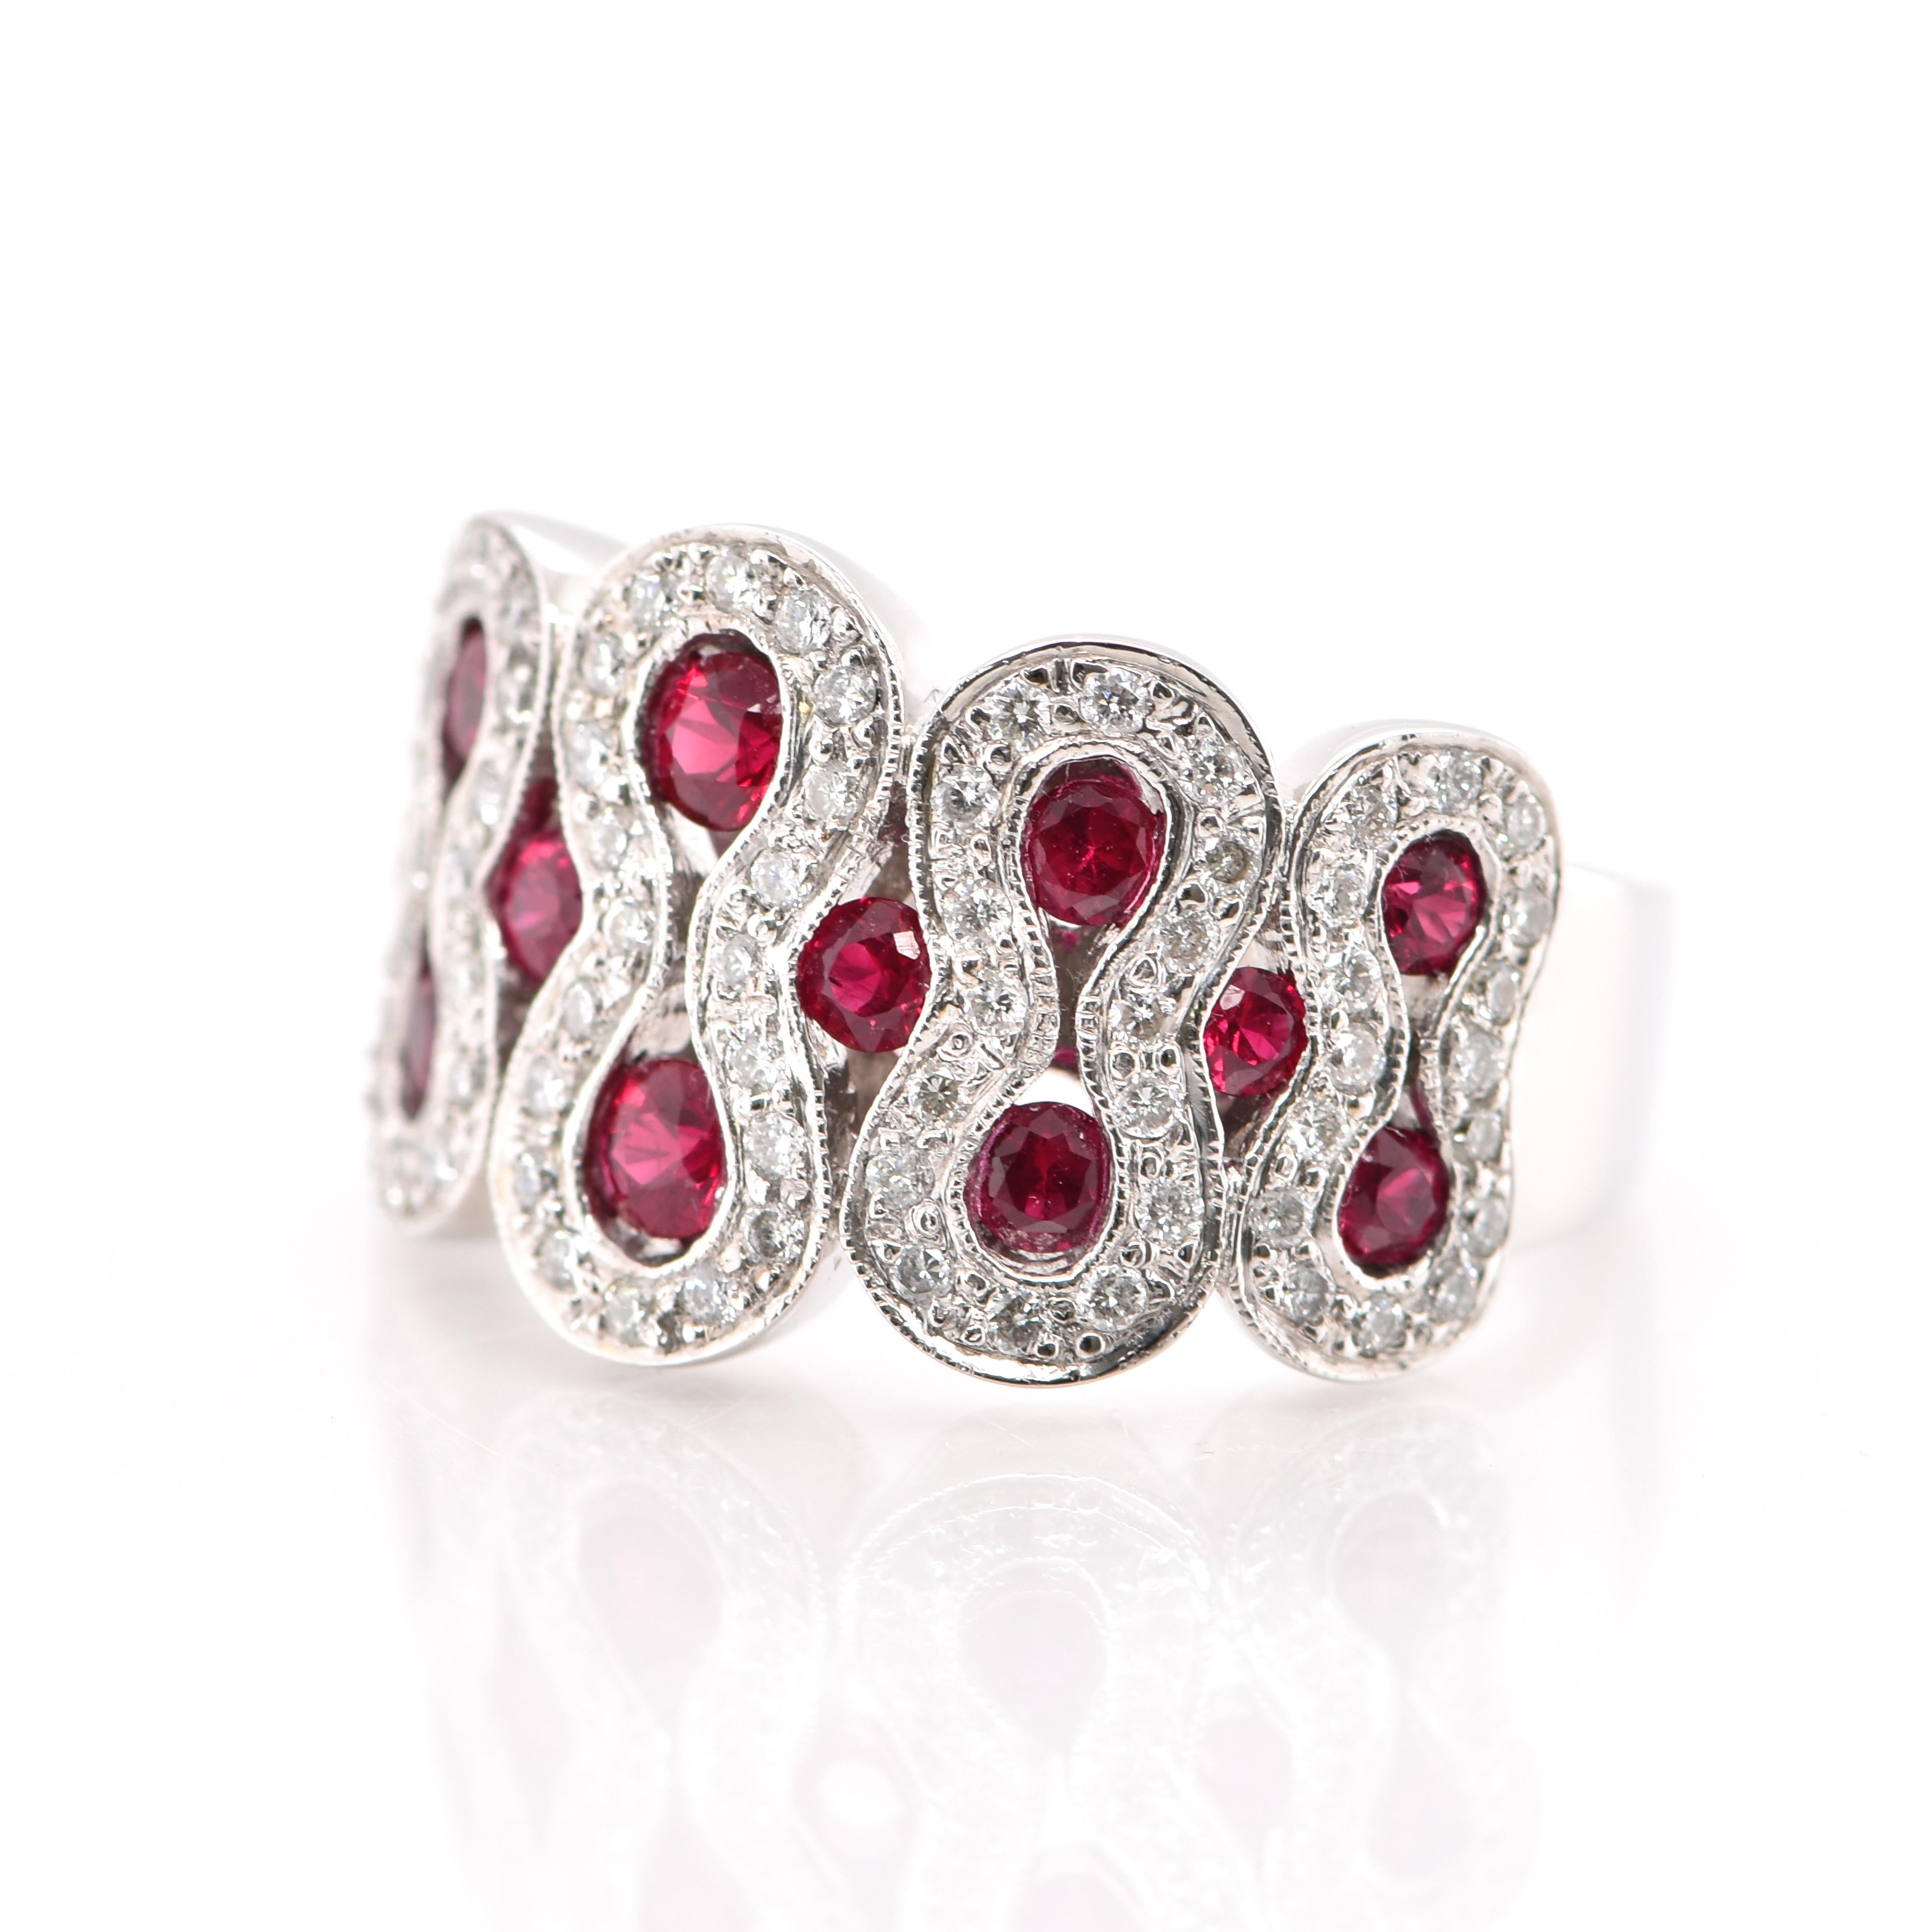 A beautiful Cocktail Ring featuring a total 1.20 Carats of Natural Ruby and 0.60 Carats of Diamond Accents set in 18 Karat White Gold. Rubies are referred to as 